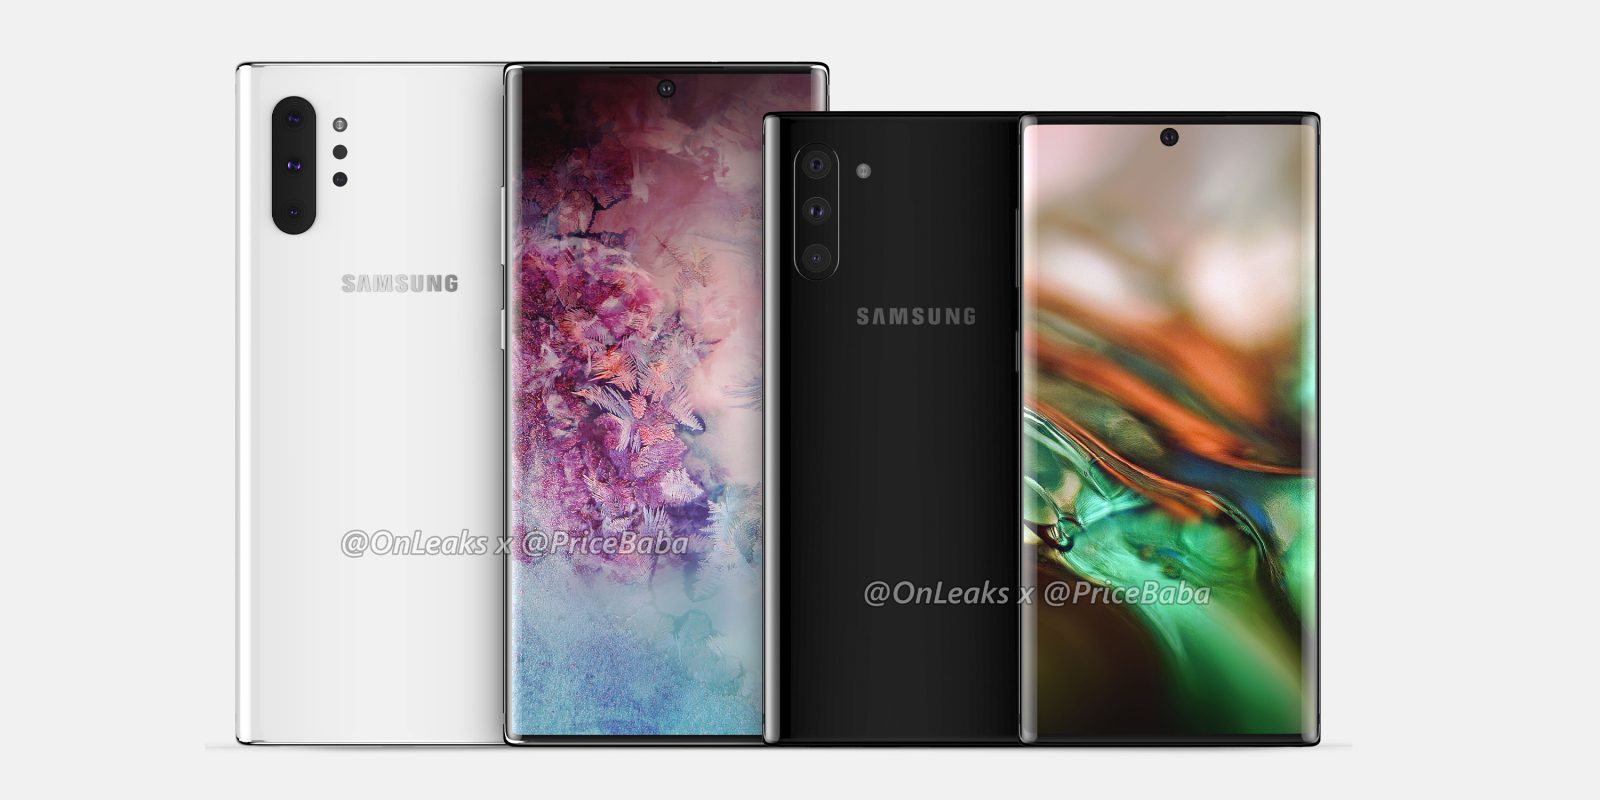 Samsung Galaxy Note 10 and Note 10 Pro renders